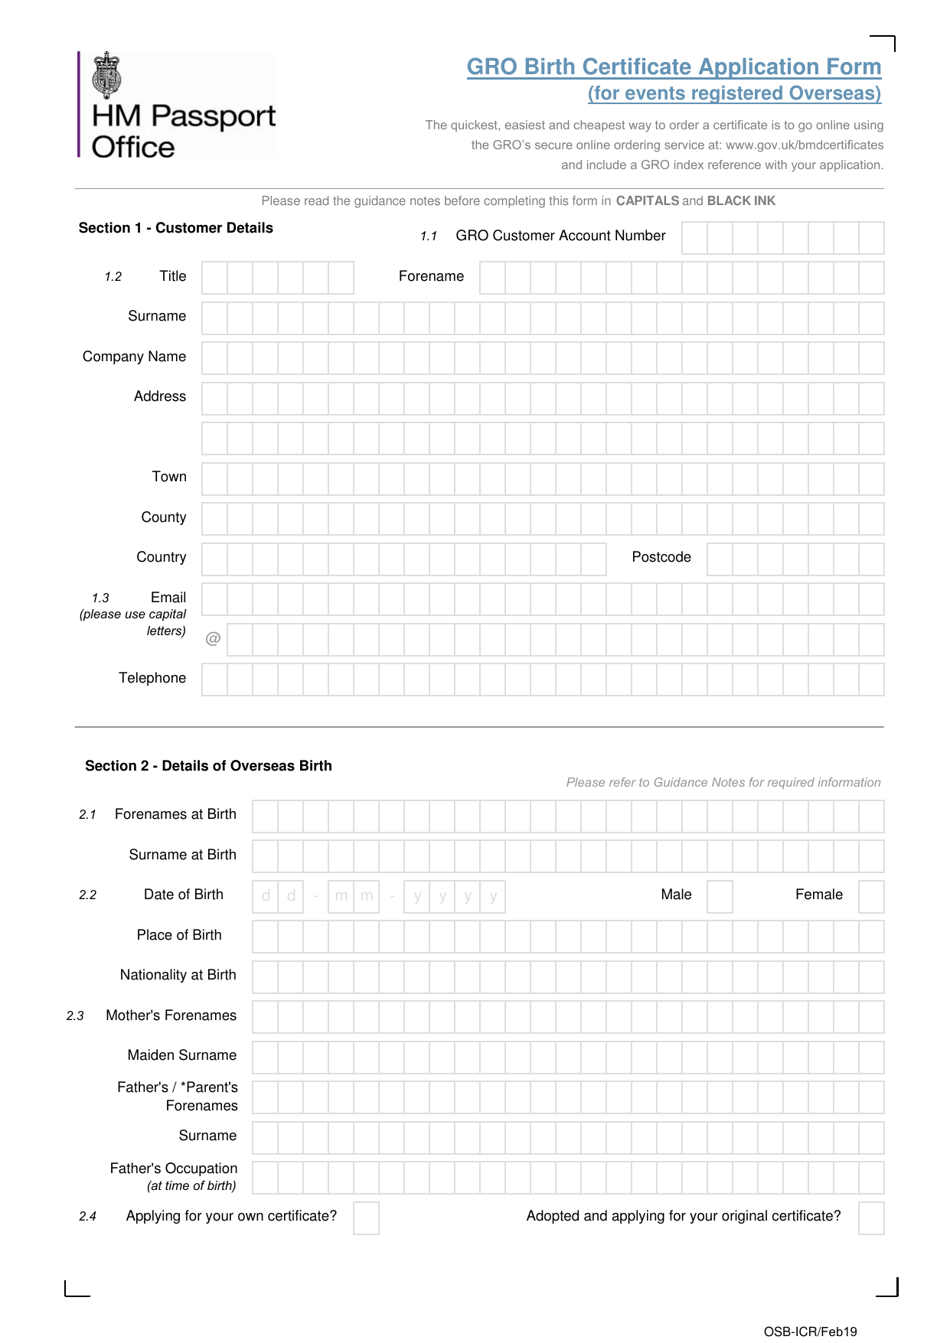 Gro Birth Certificate Application Form (For Events Registered Overseas) - United Kingdom, Page 1